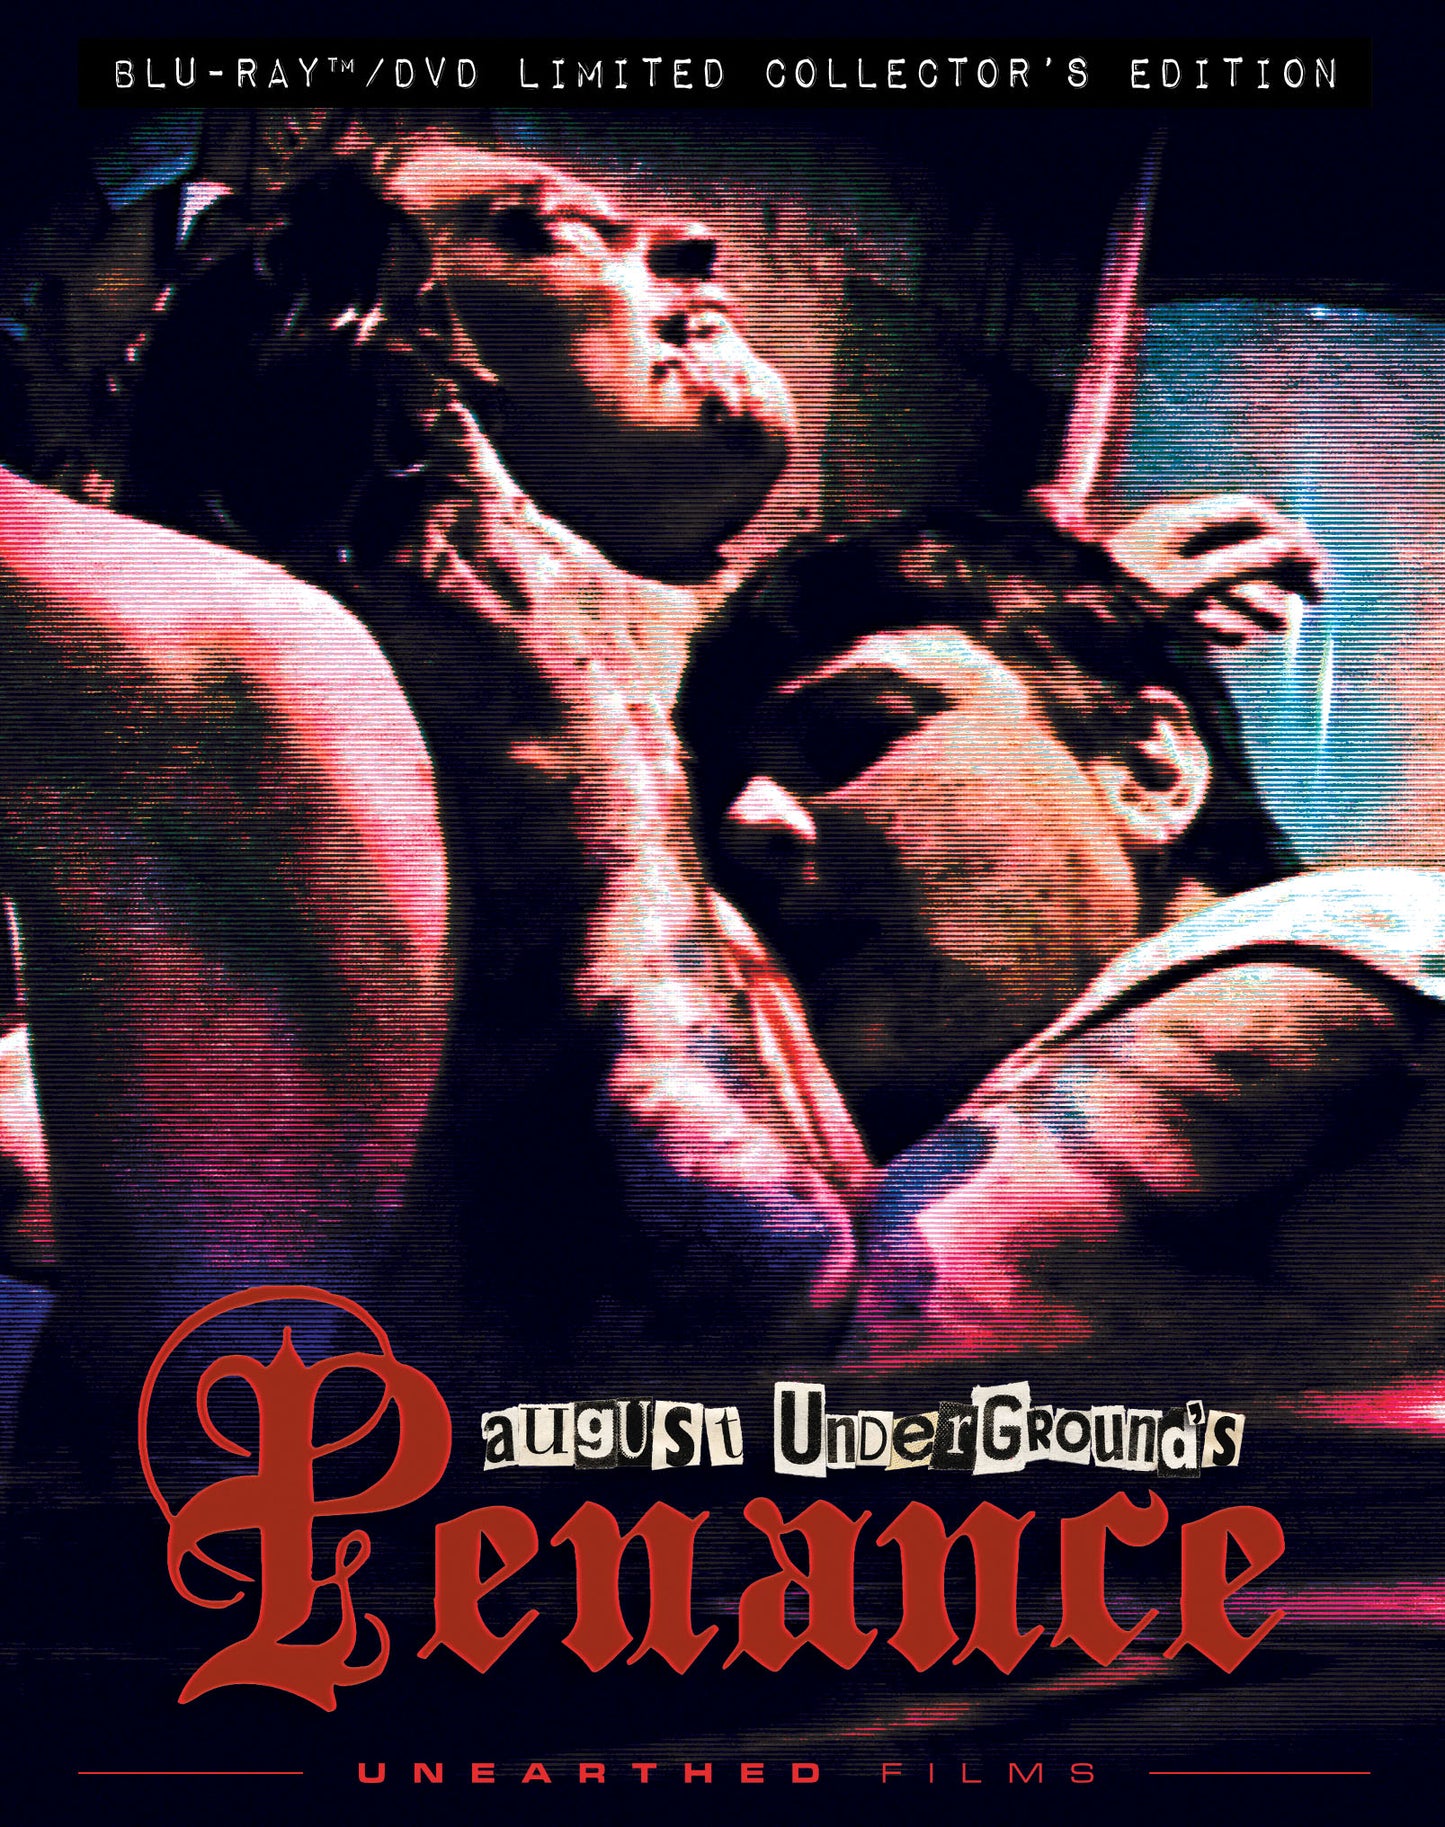 August Underground's Penance (Limited Edition) Blu-ray